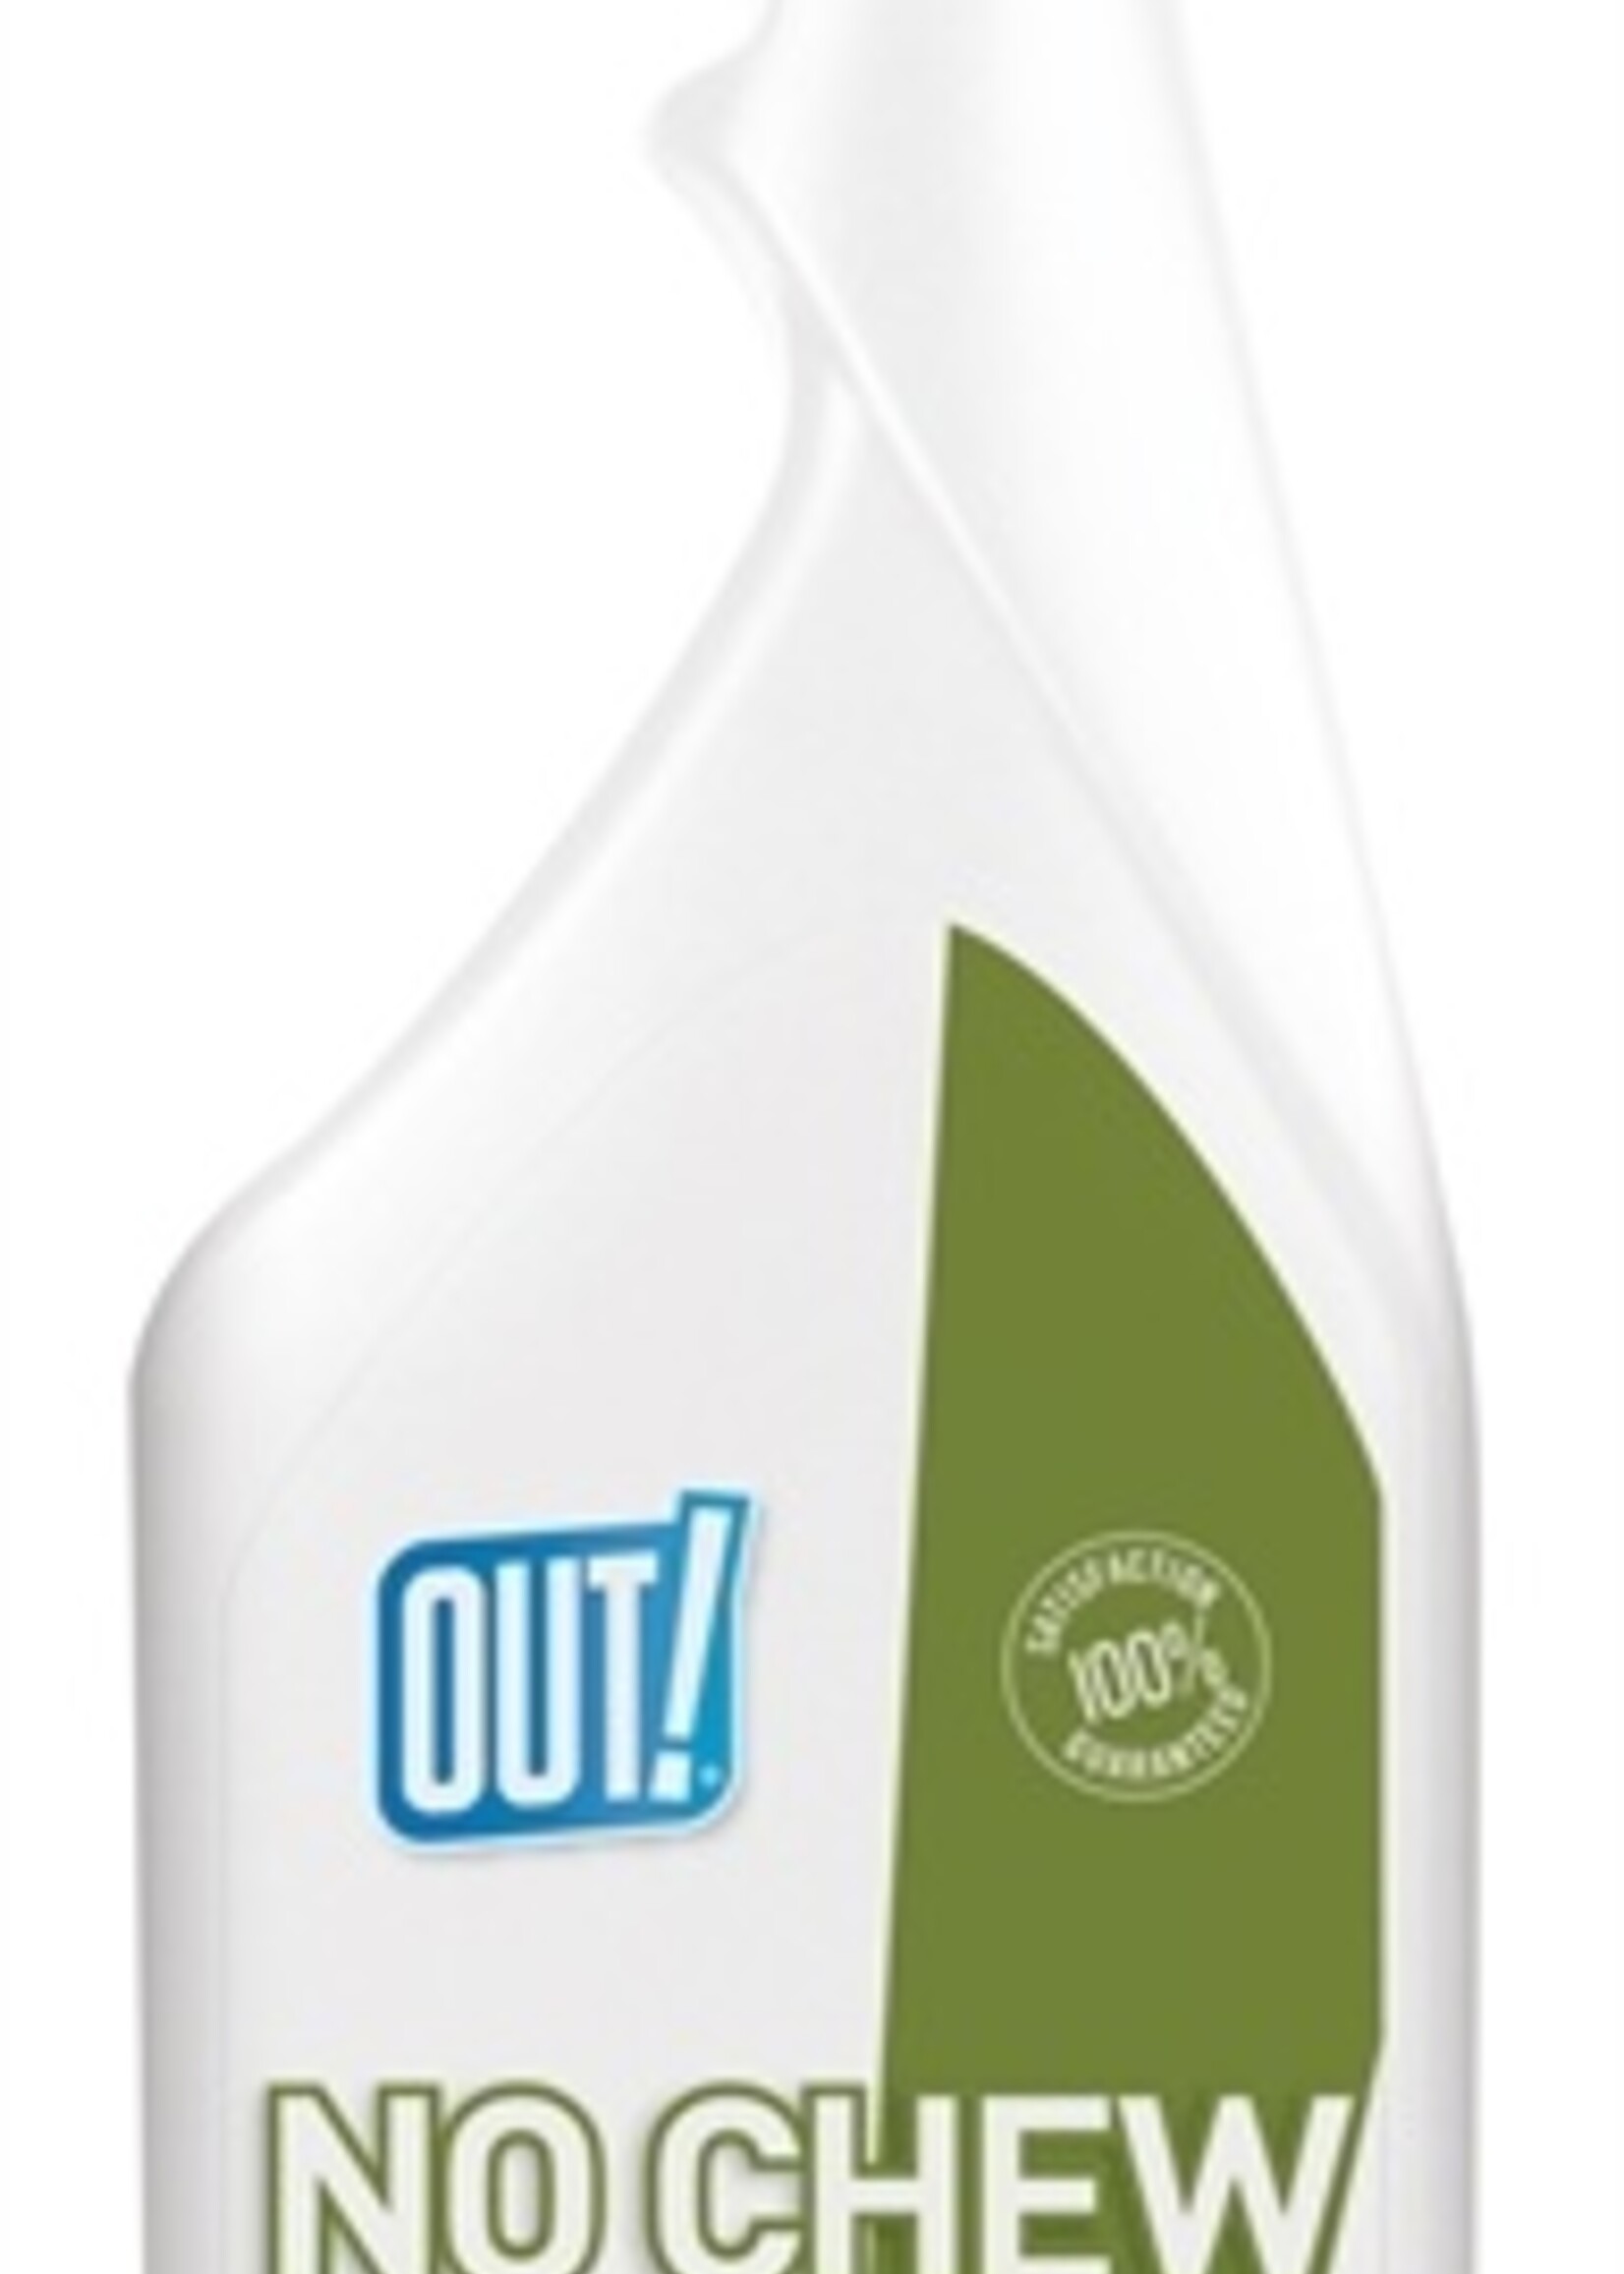 Out! Out! no chew deterrent spray